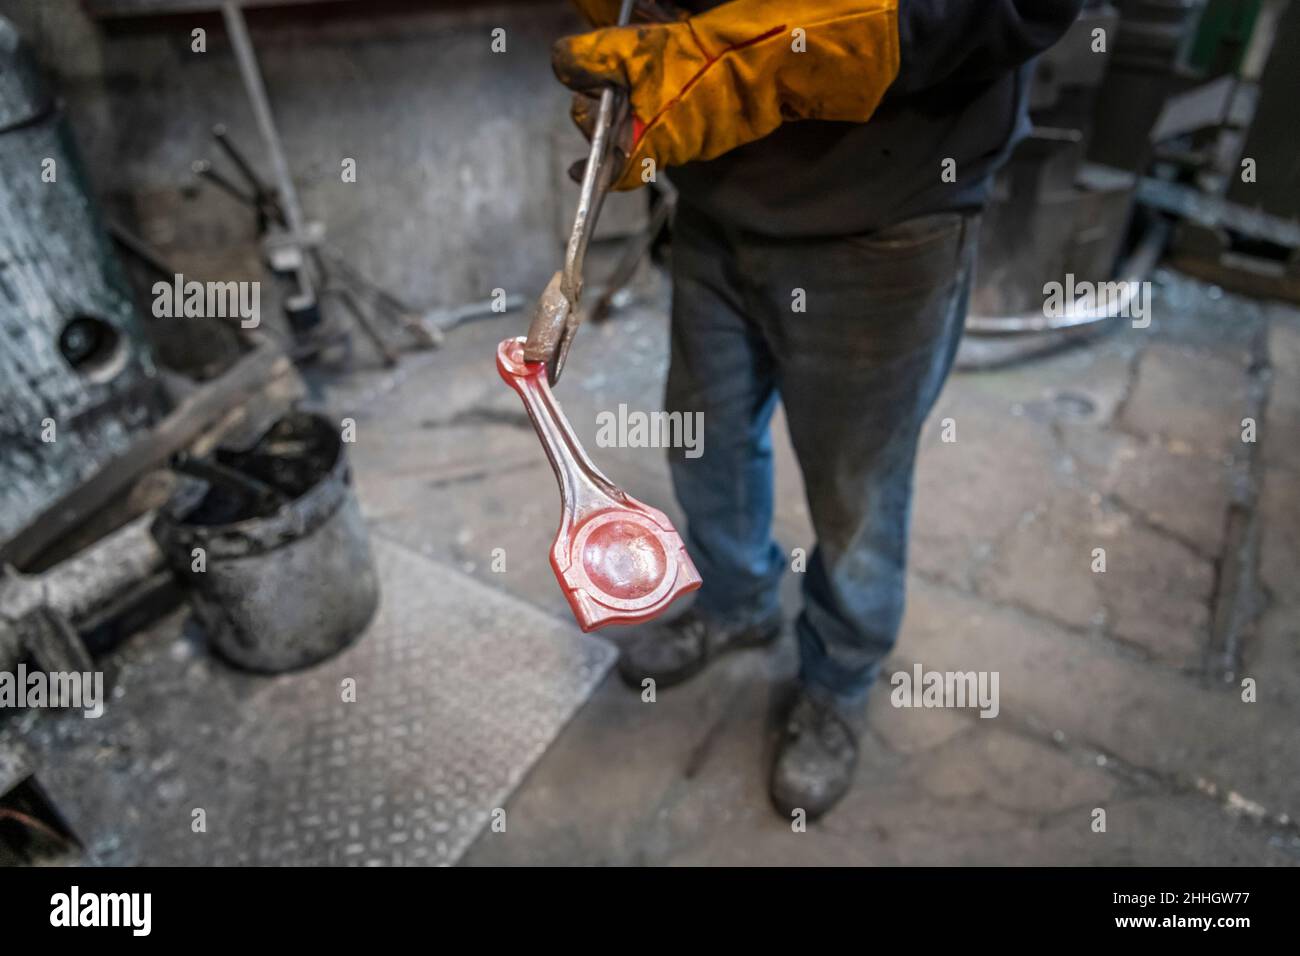 Worker holding hot titanium forged part in industrial forge Stock Photo